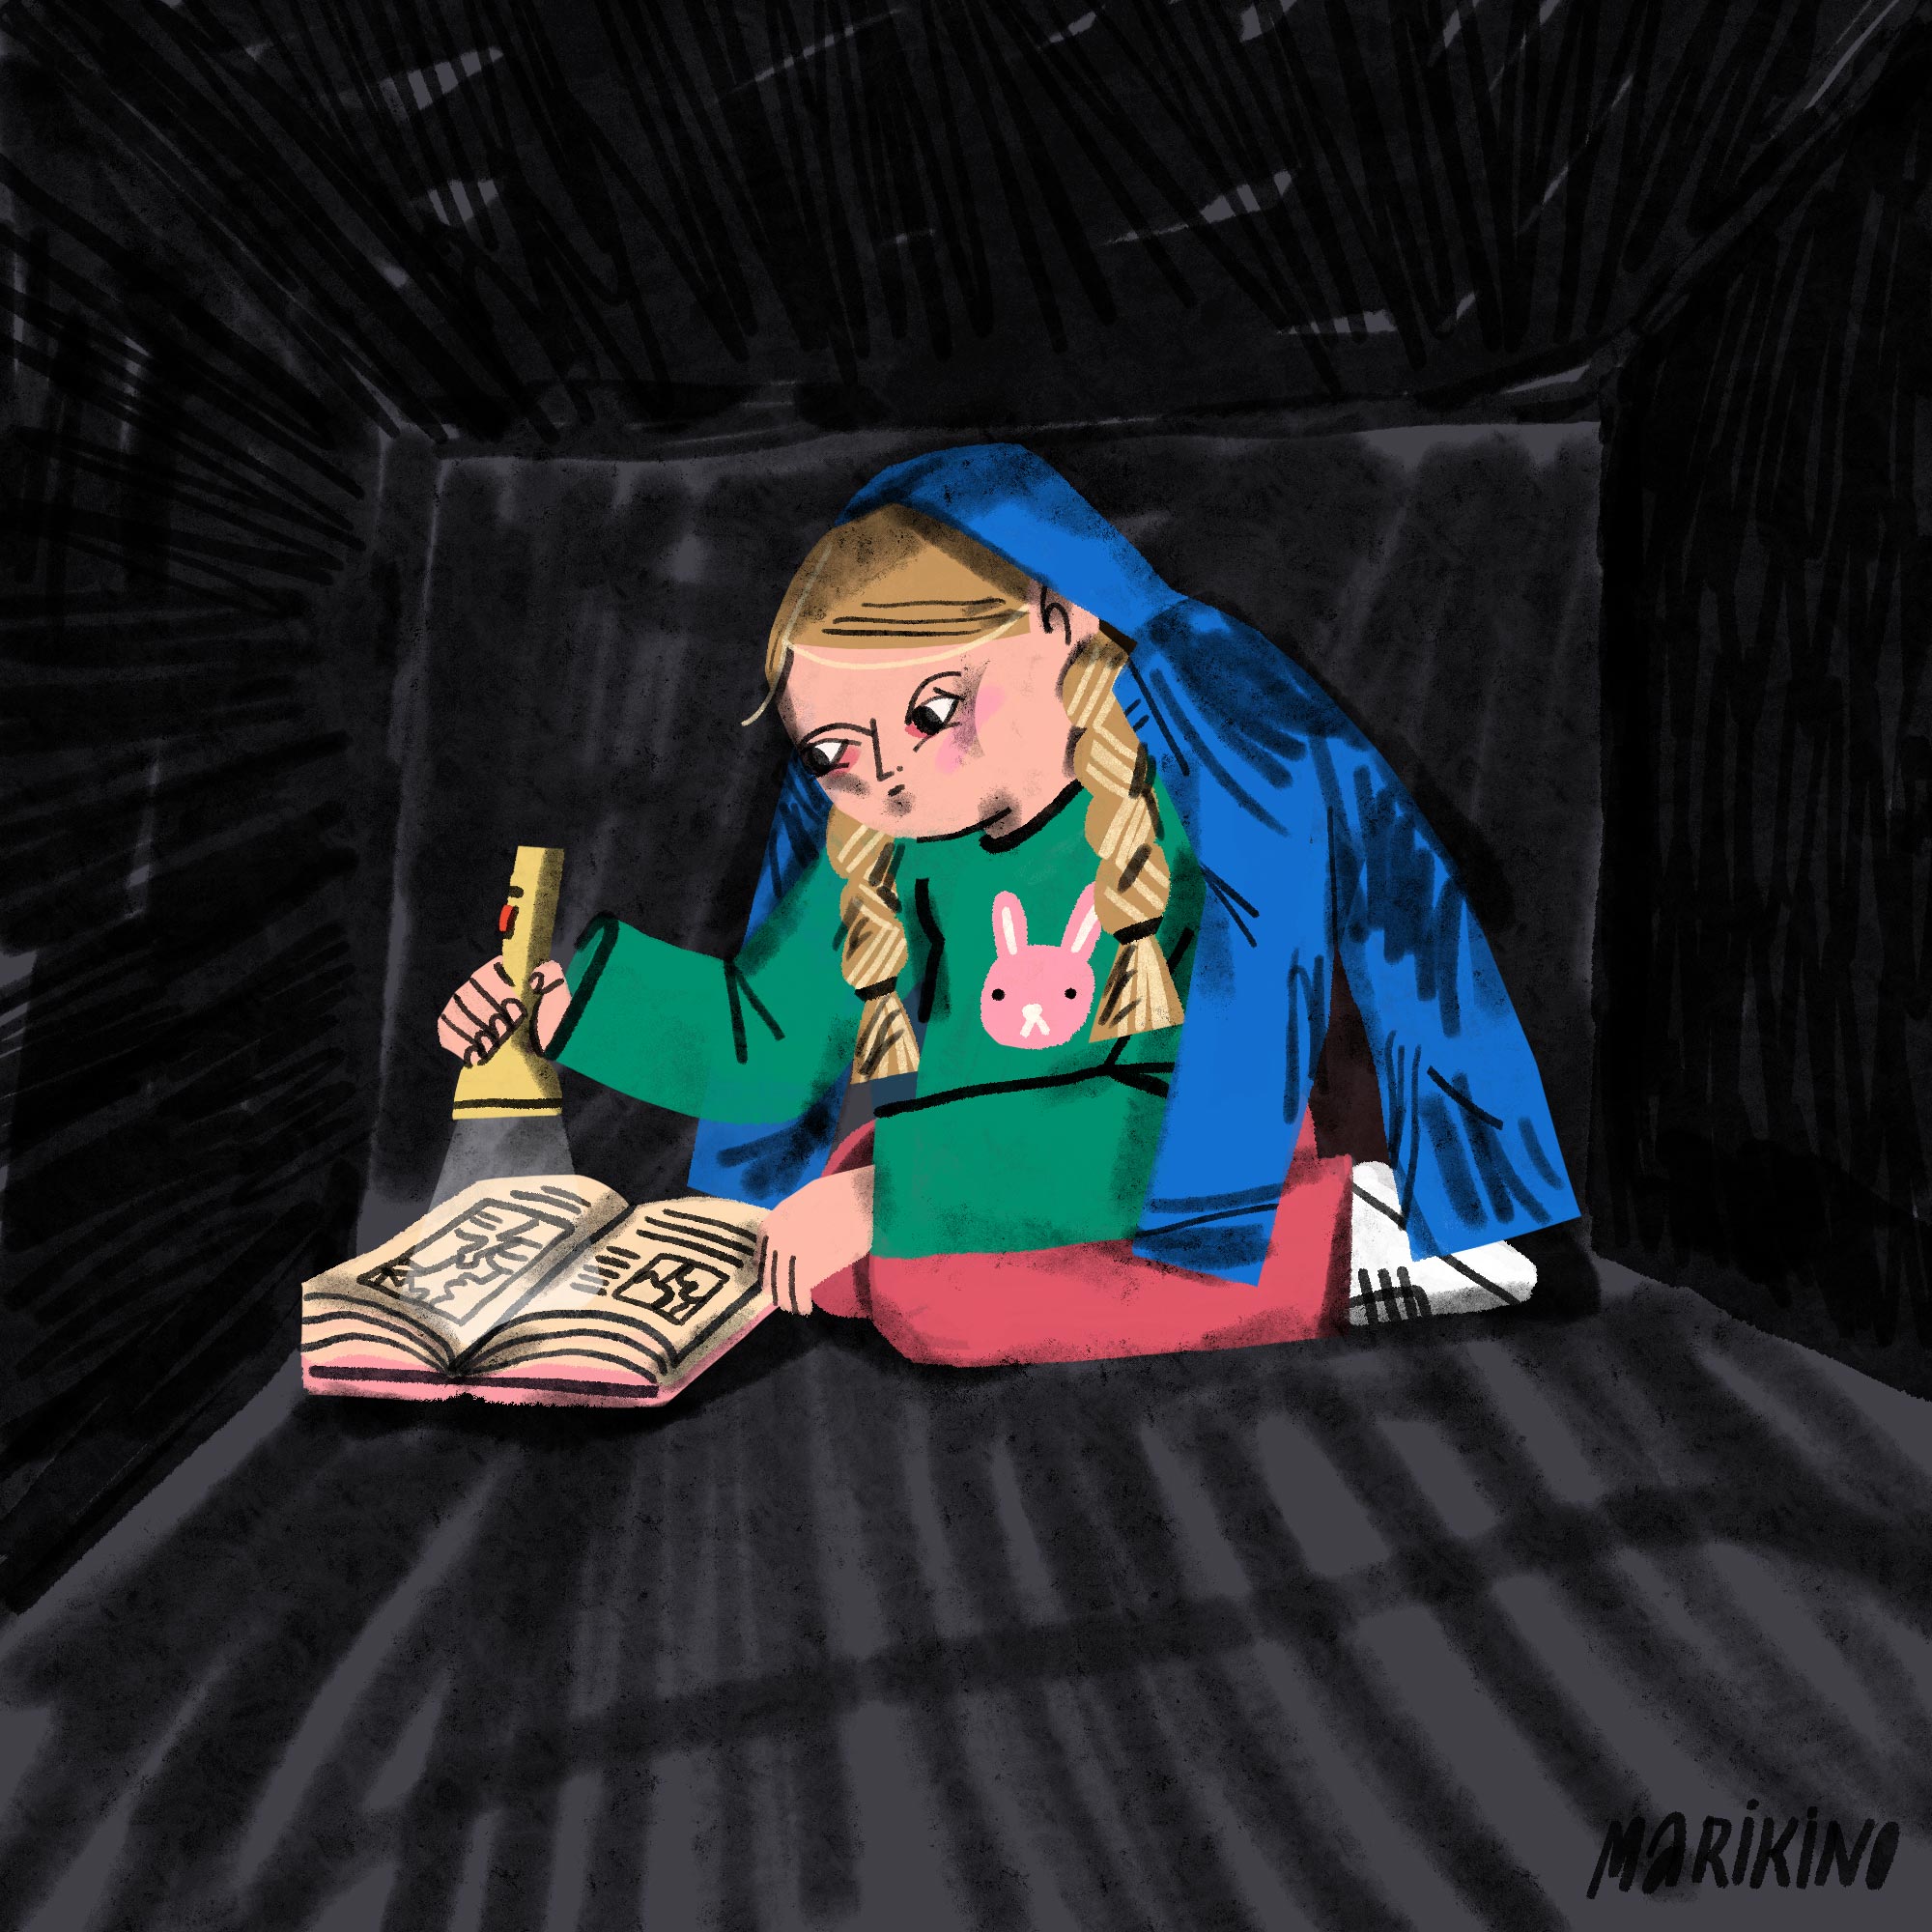 This illustration by Mari Kinovych is about stolen childhood and depicts how children are trying to study in the bomb shelters. — Provided by artist